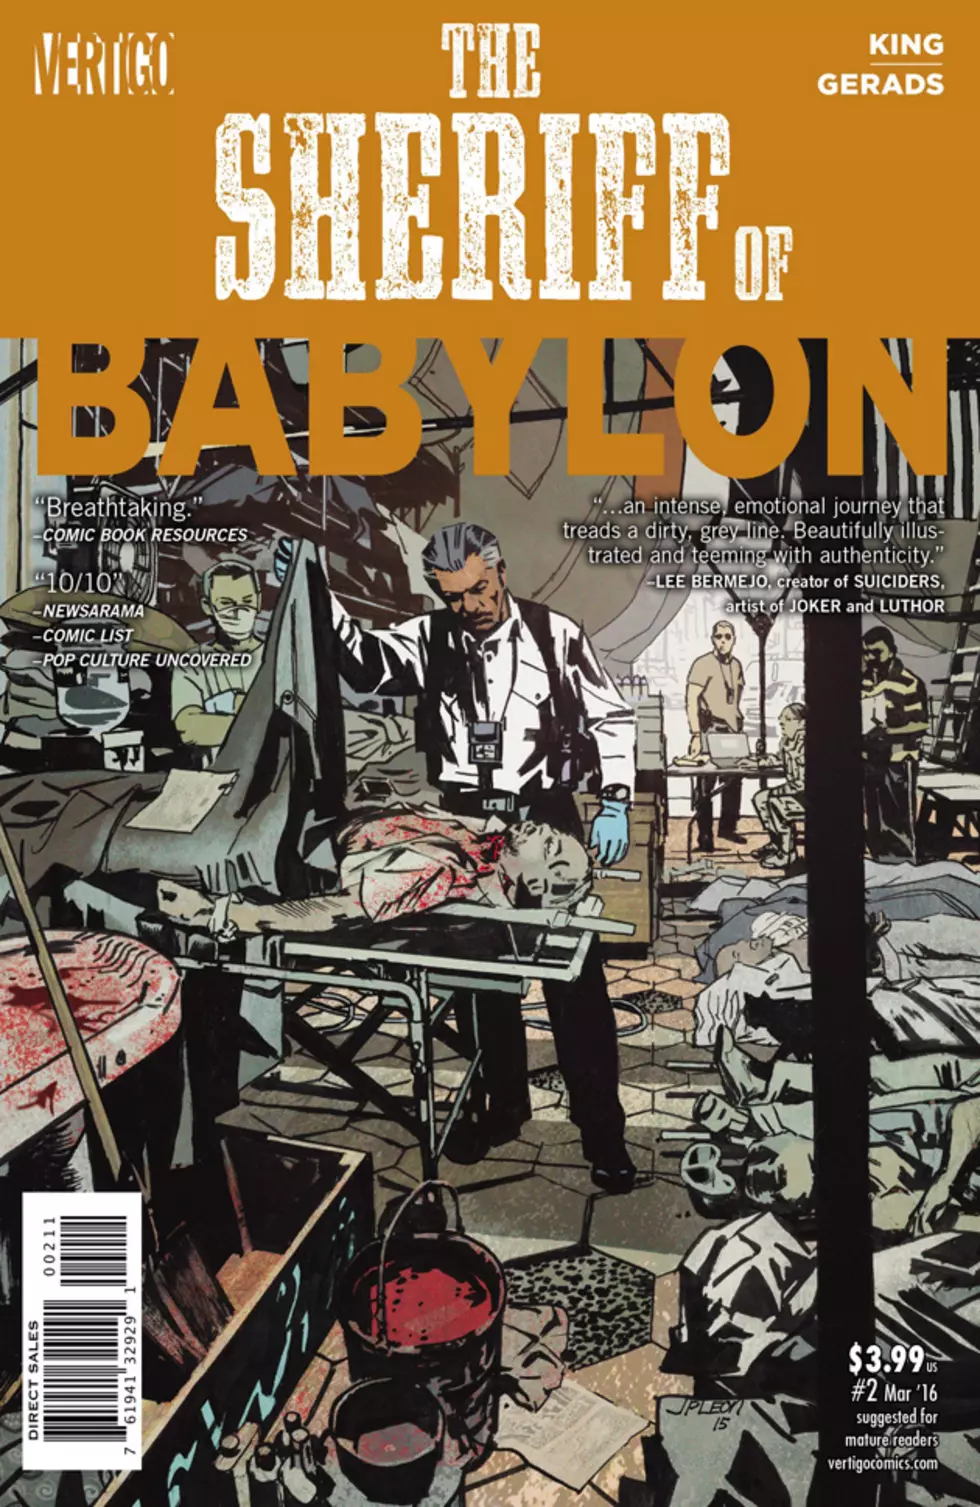 Lunch Gets Very Tense In &#8216;Sheriff Of Babylon&#8217; #2 [Preview]